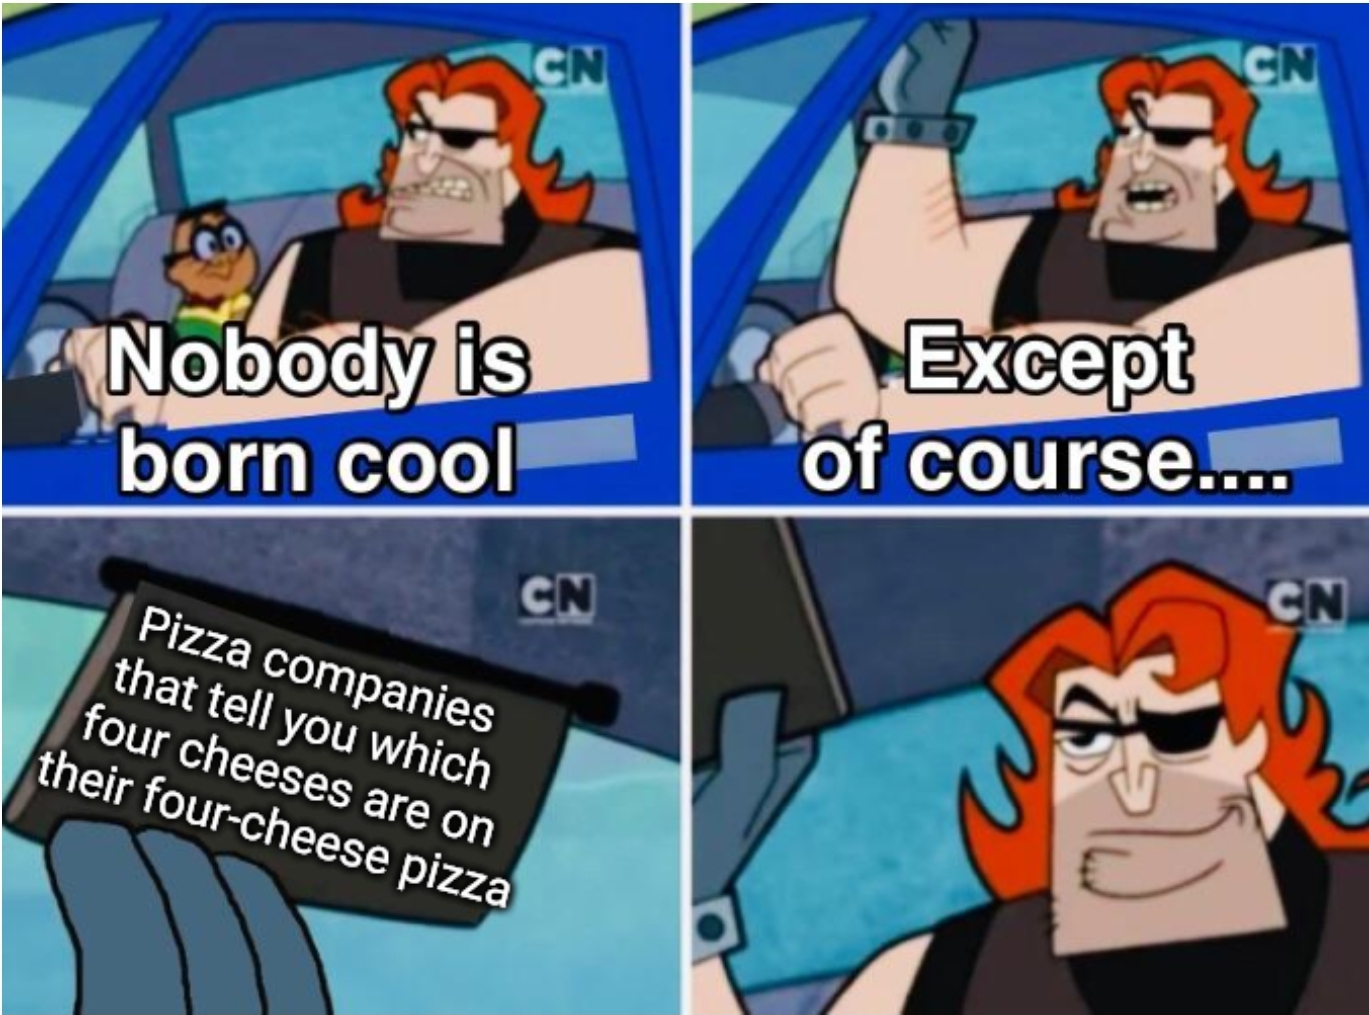 dank memes - ve seen enough i m satisfied - Nobody is born cool Cn Cn Pizza companies that tell you which four cheeses are on their fourcheese pizza Do Cn Except of course.... Cn